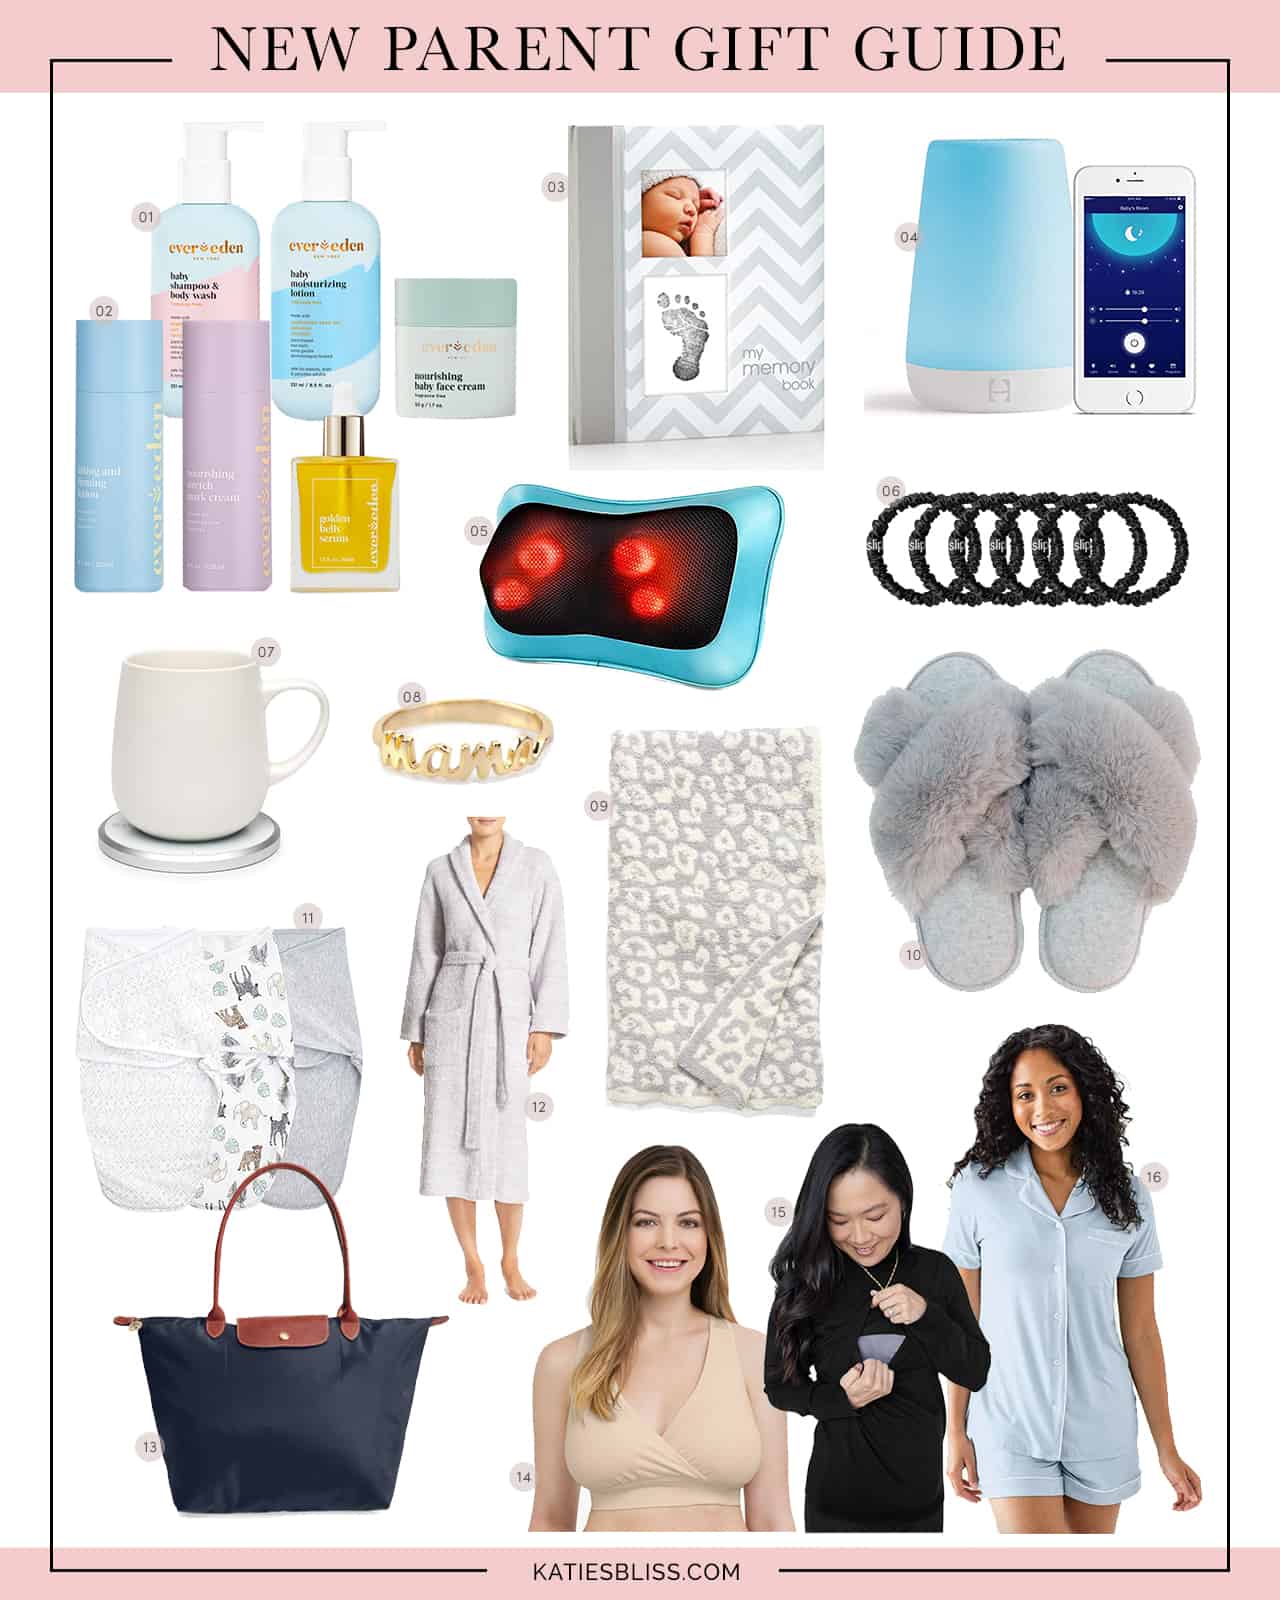 Katies Bliss New Parent Gift Guide